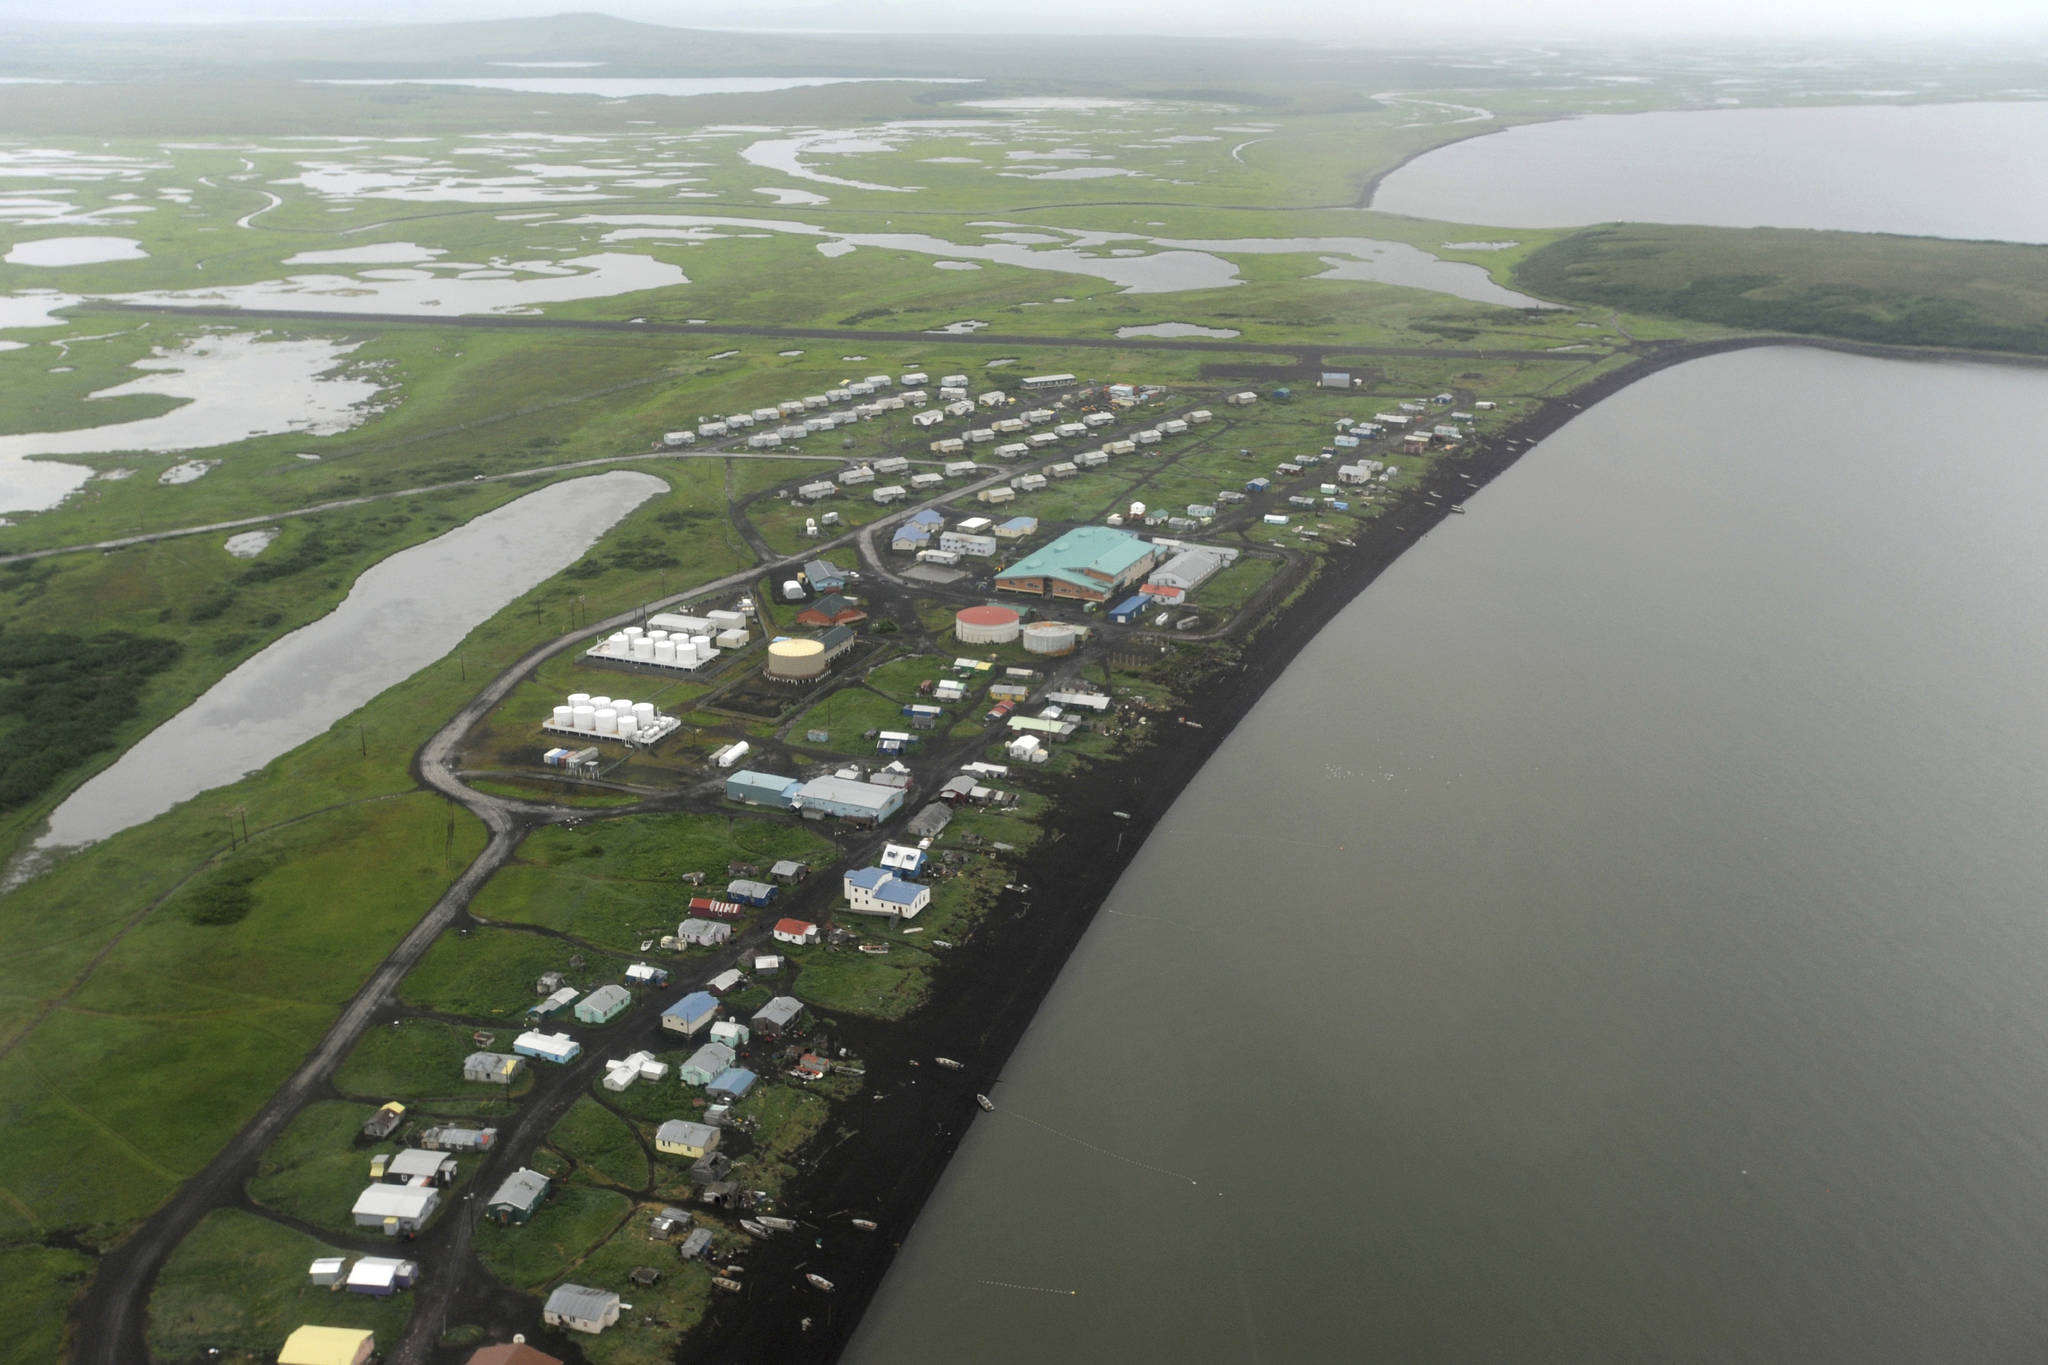 This Wednesday, June 26, 2019 photo shows an aerial view of the Yup’ik village of Stebbins on the Norton Sound coast in Western Alaska. The city is among over a dozen cities in Alaska that have employed police officers whose criminal records should have prevented them from being hired under state law, the Anchorage Daily News and ProPublica reported Saturday, July 20. (Bill Roth/Anchorage Daily News via AP)